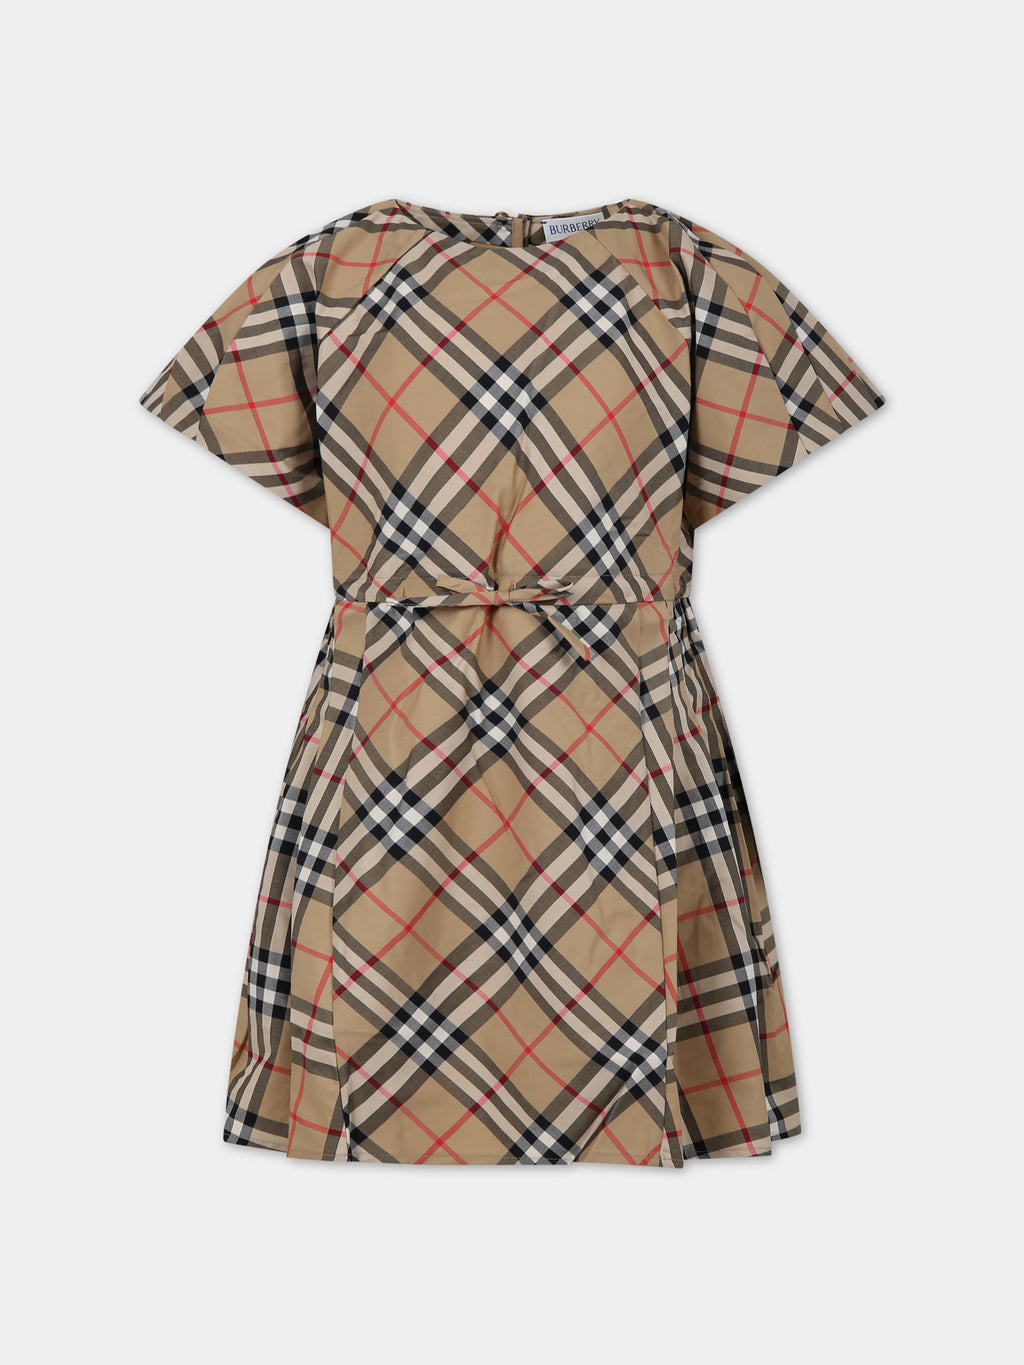 Beige dress for girl with iconic all-over vintage check